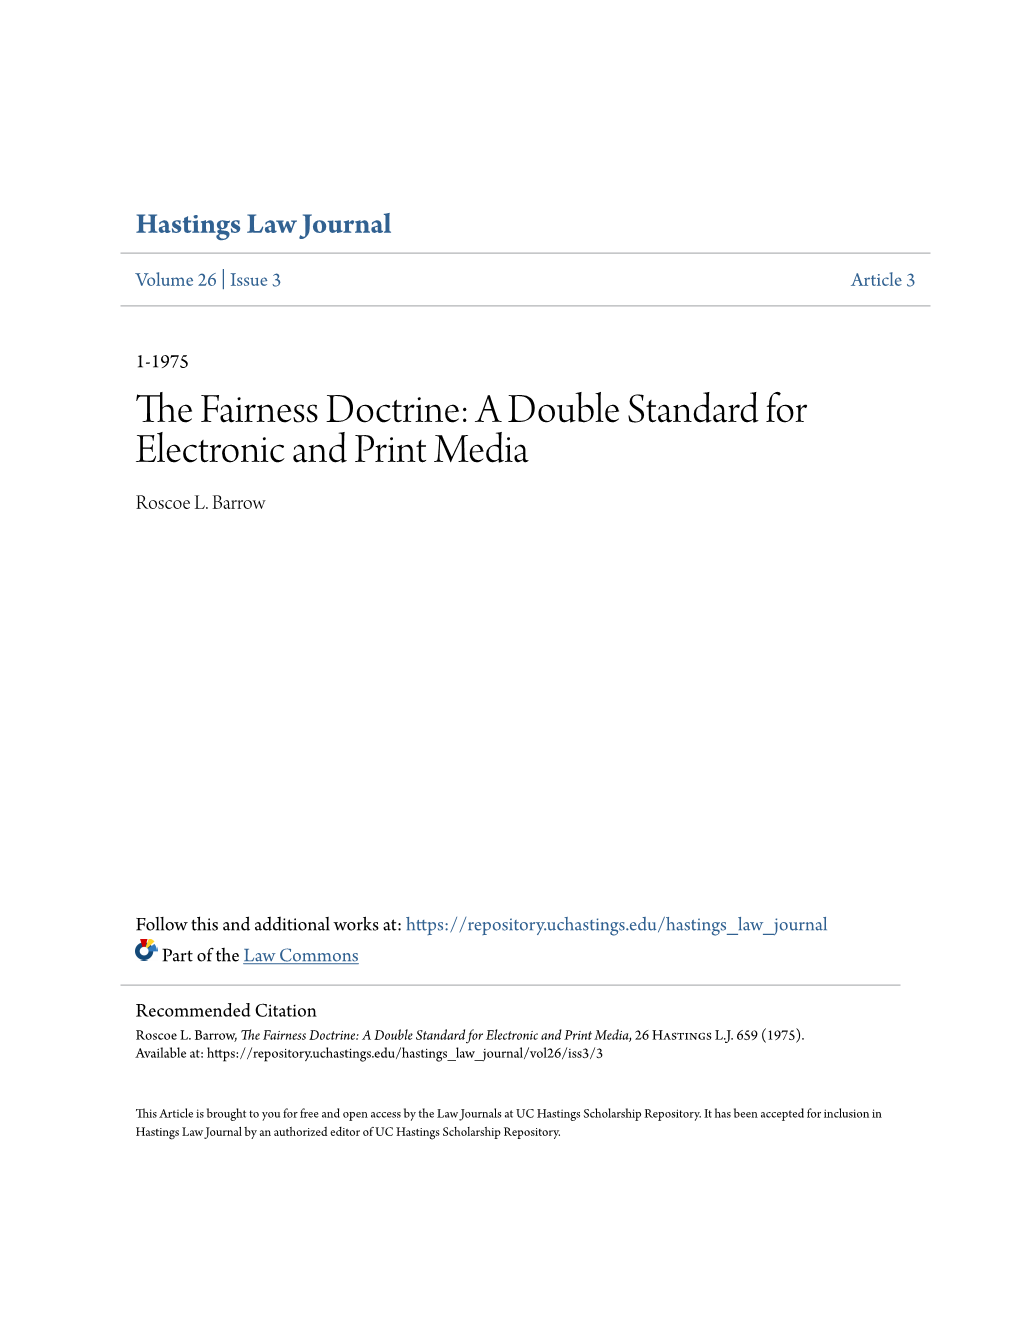 The Fairness Doctrine: a Double Standard for Electronic and Print Media, 26 Hastings L.J